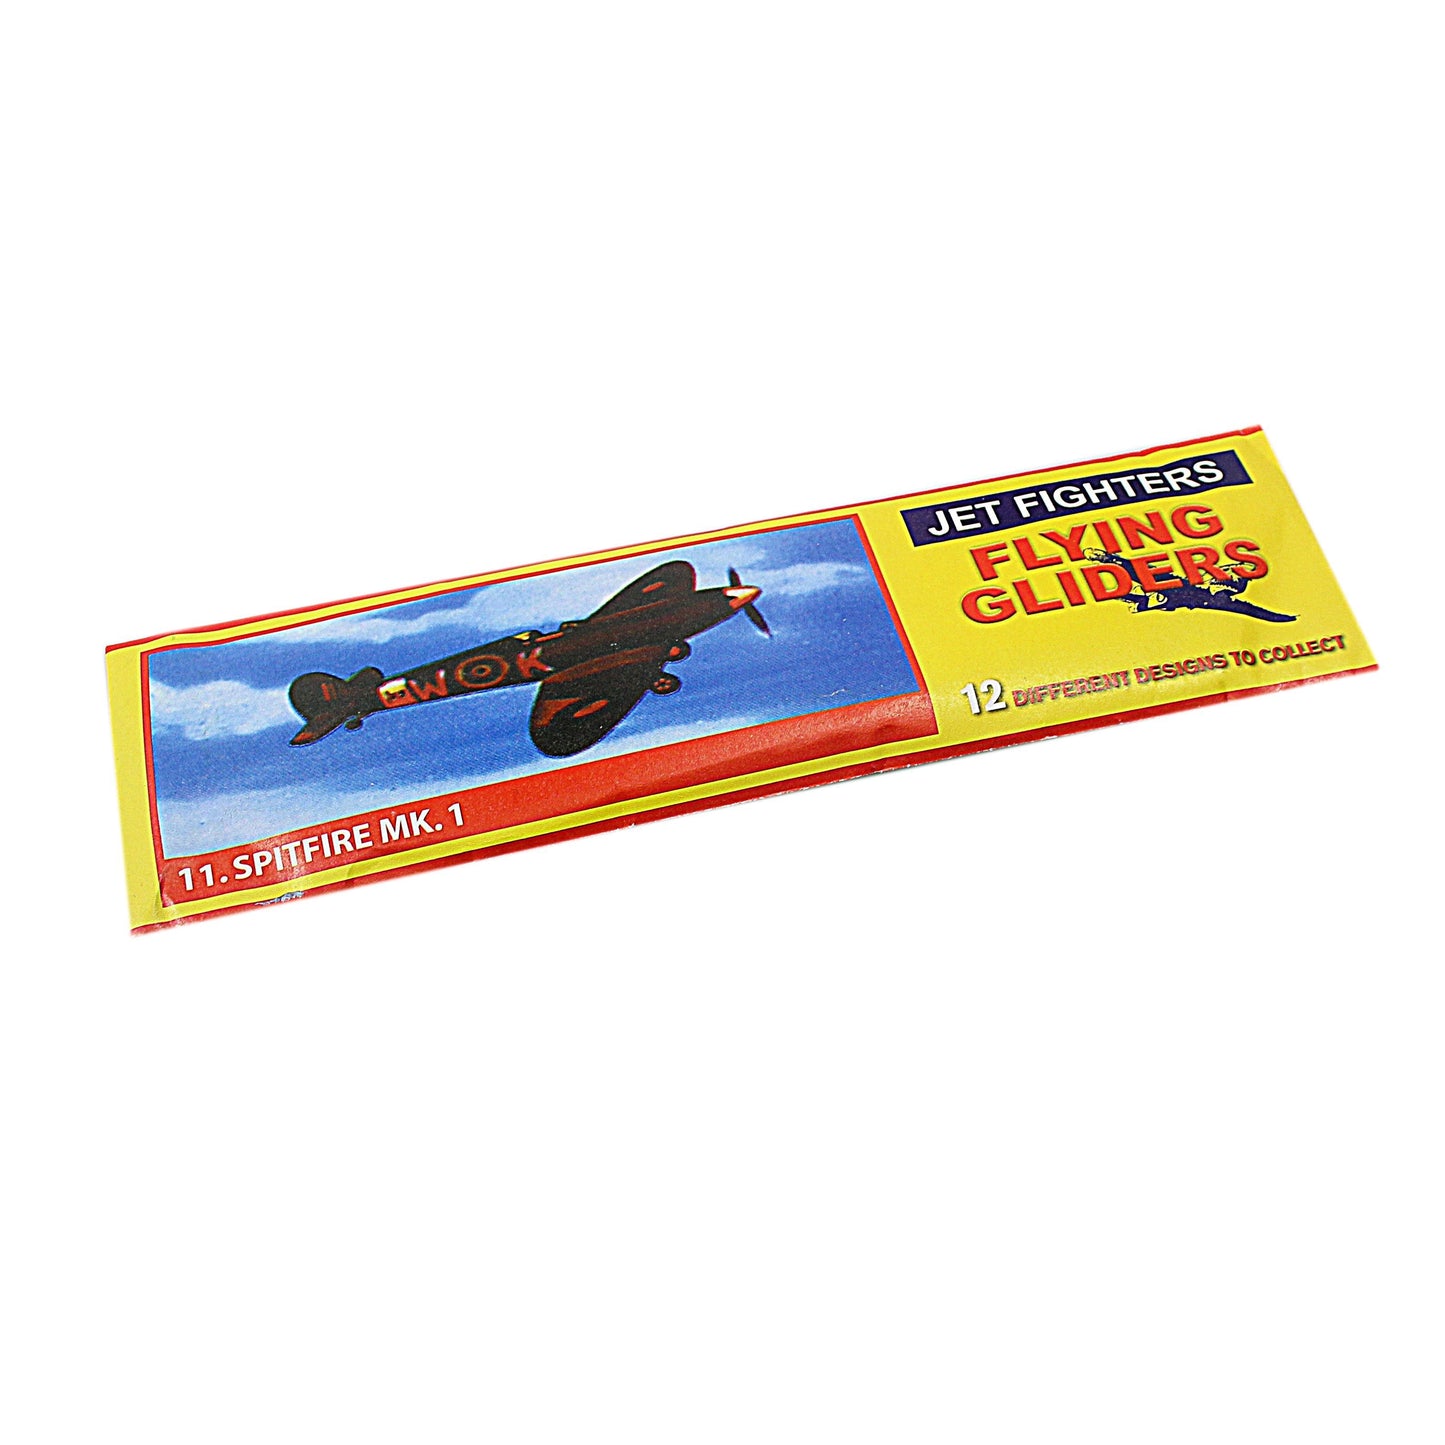 Jet Fighters Flying Gliders 12 Different Designs To Collect  R20001 (Parcel Rate)